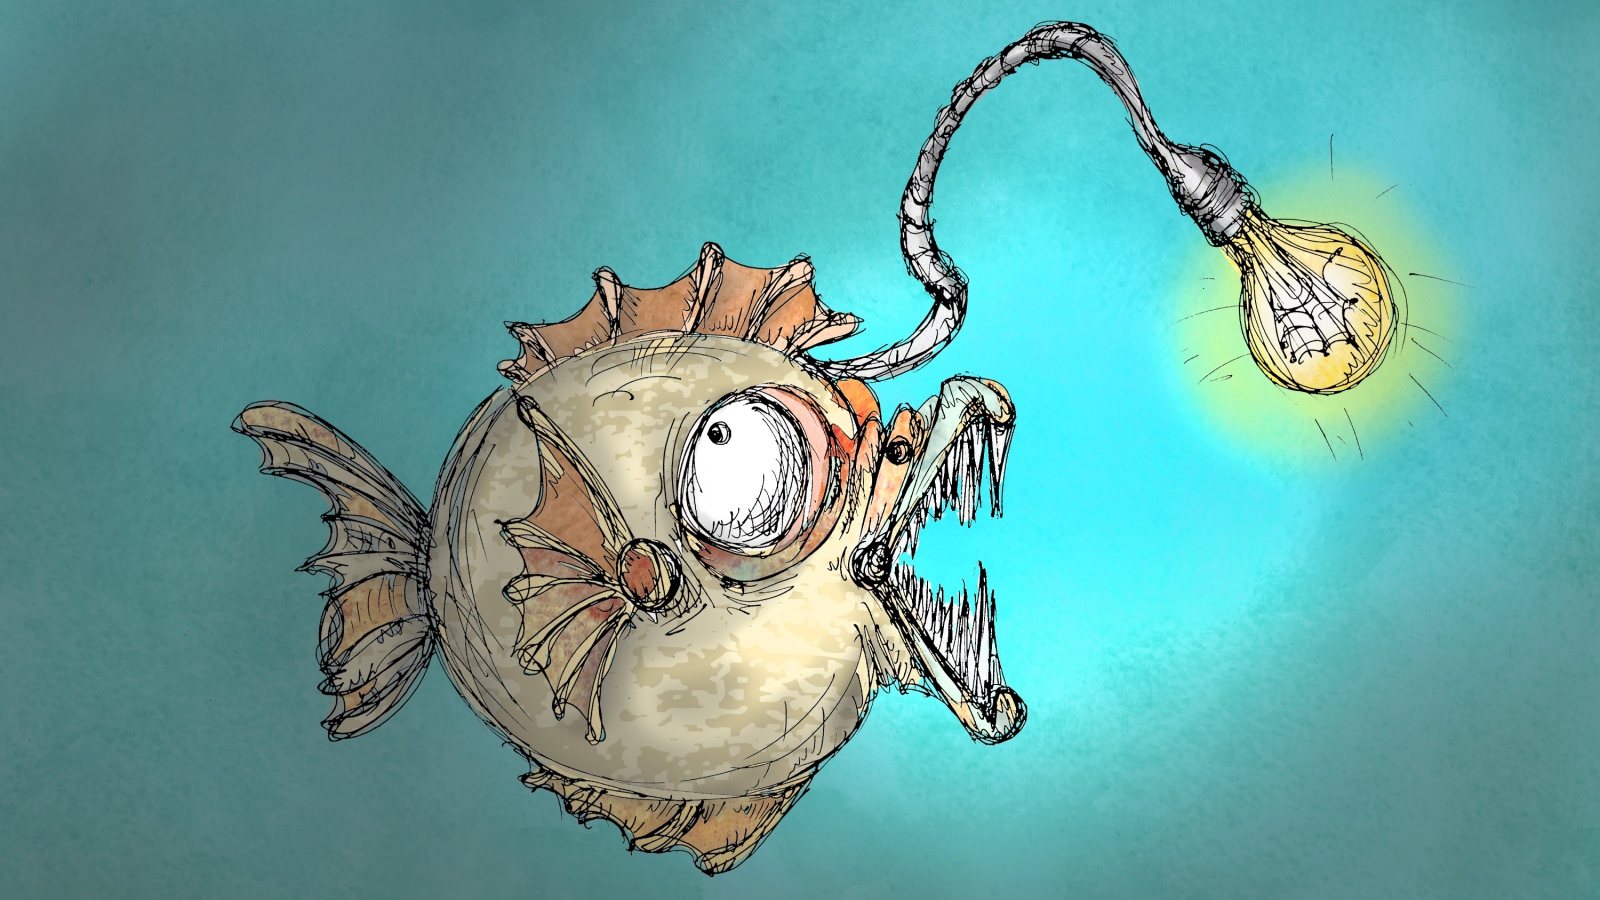 angler fish sketch with a lightbulb